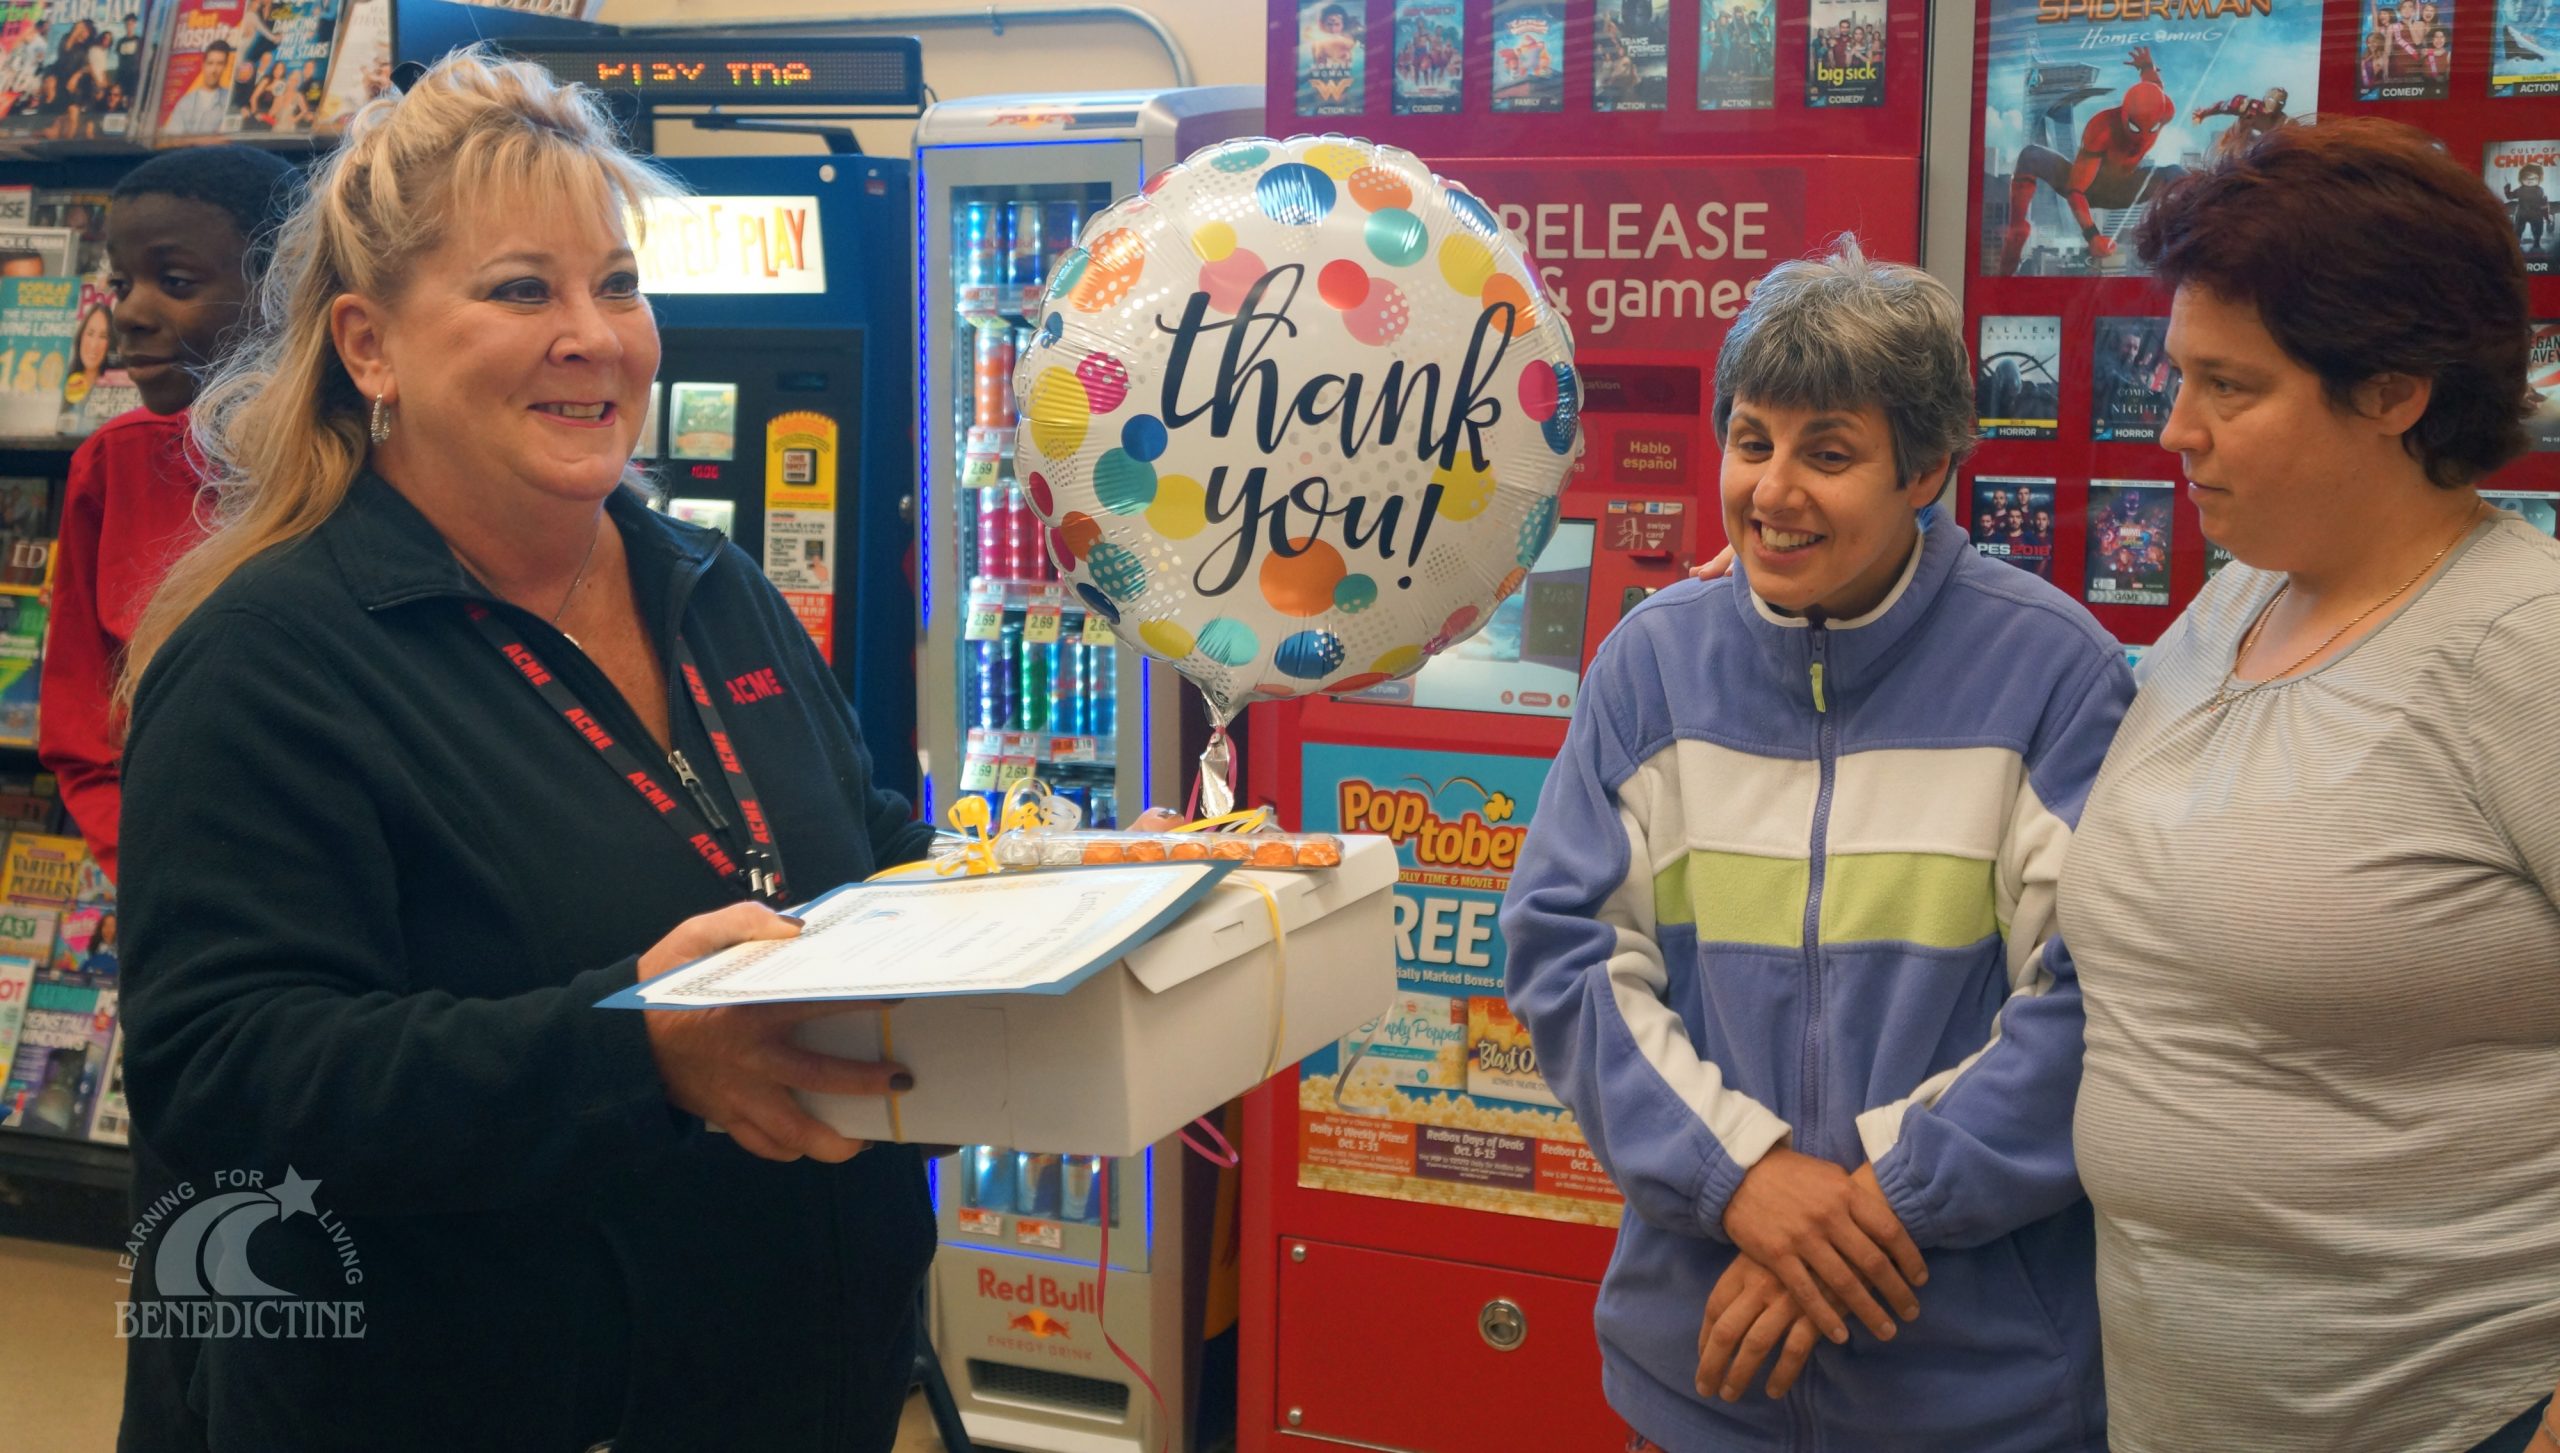 Members of Benedictine's Adult Services giving balloon and cake to Acme Store Director Susan Killen.